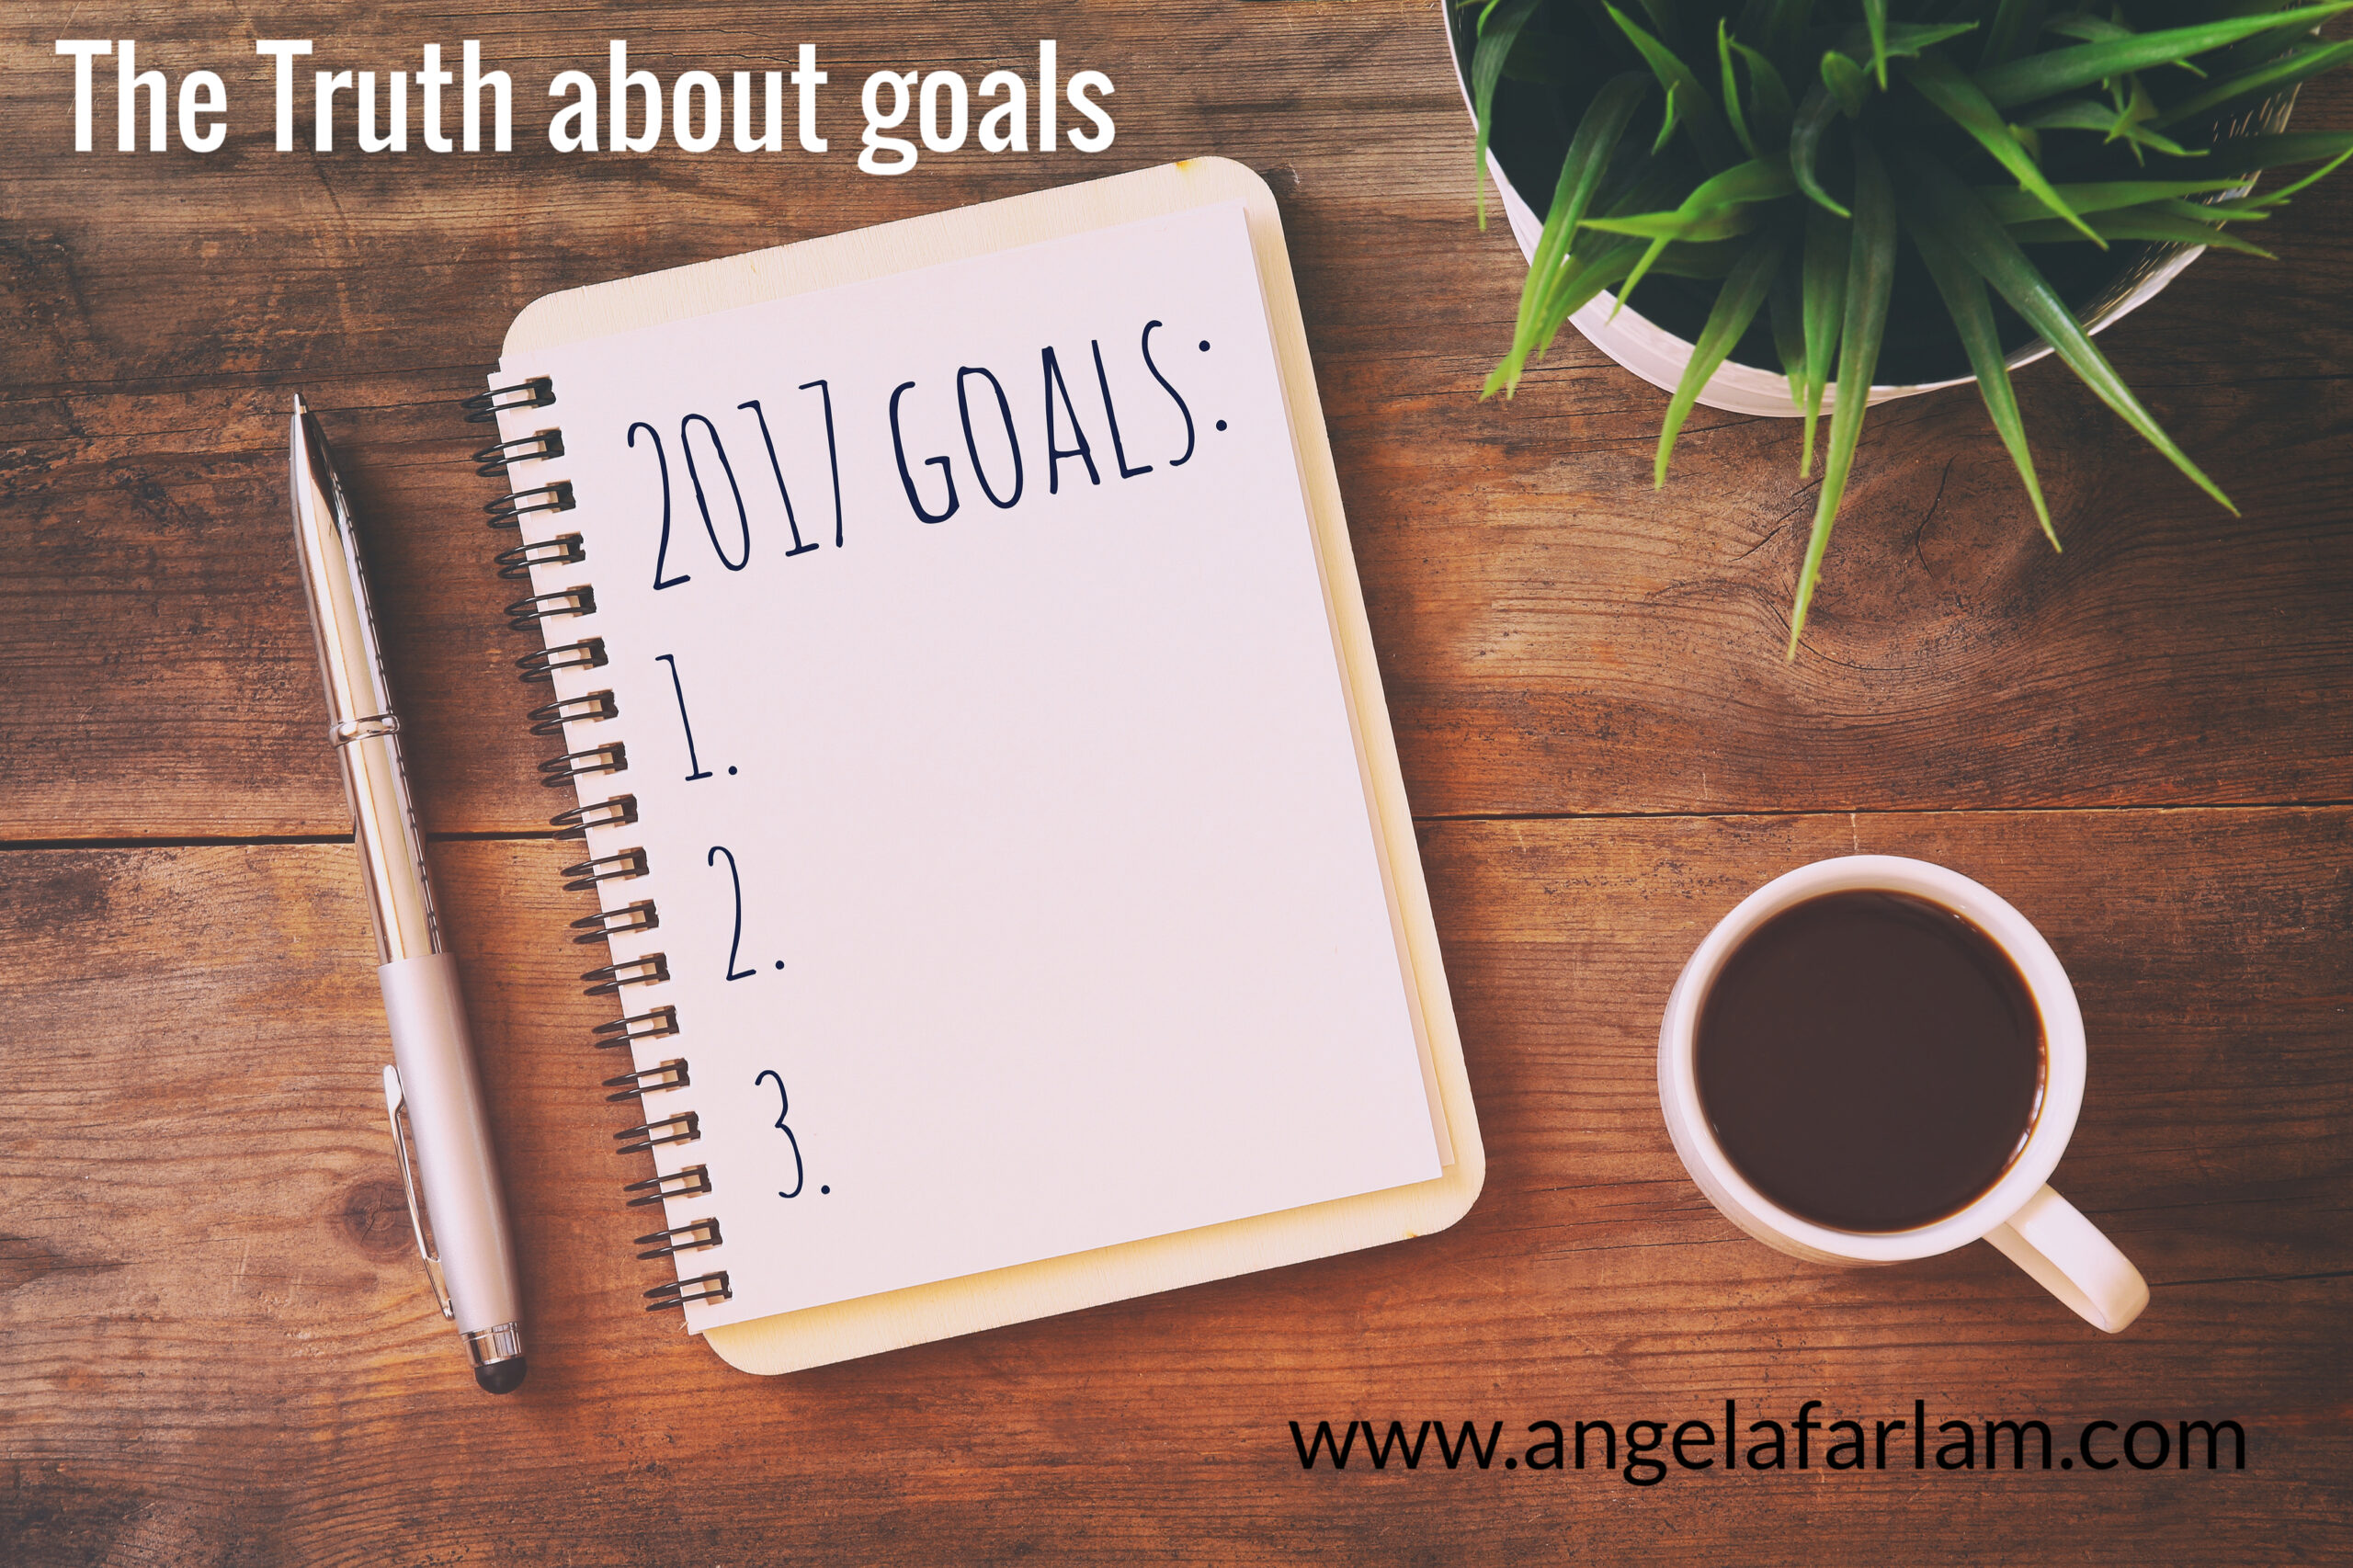 The Truth about Goals